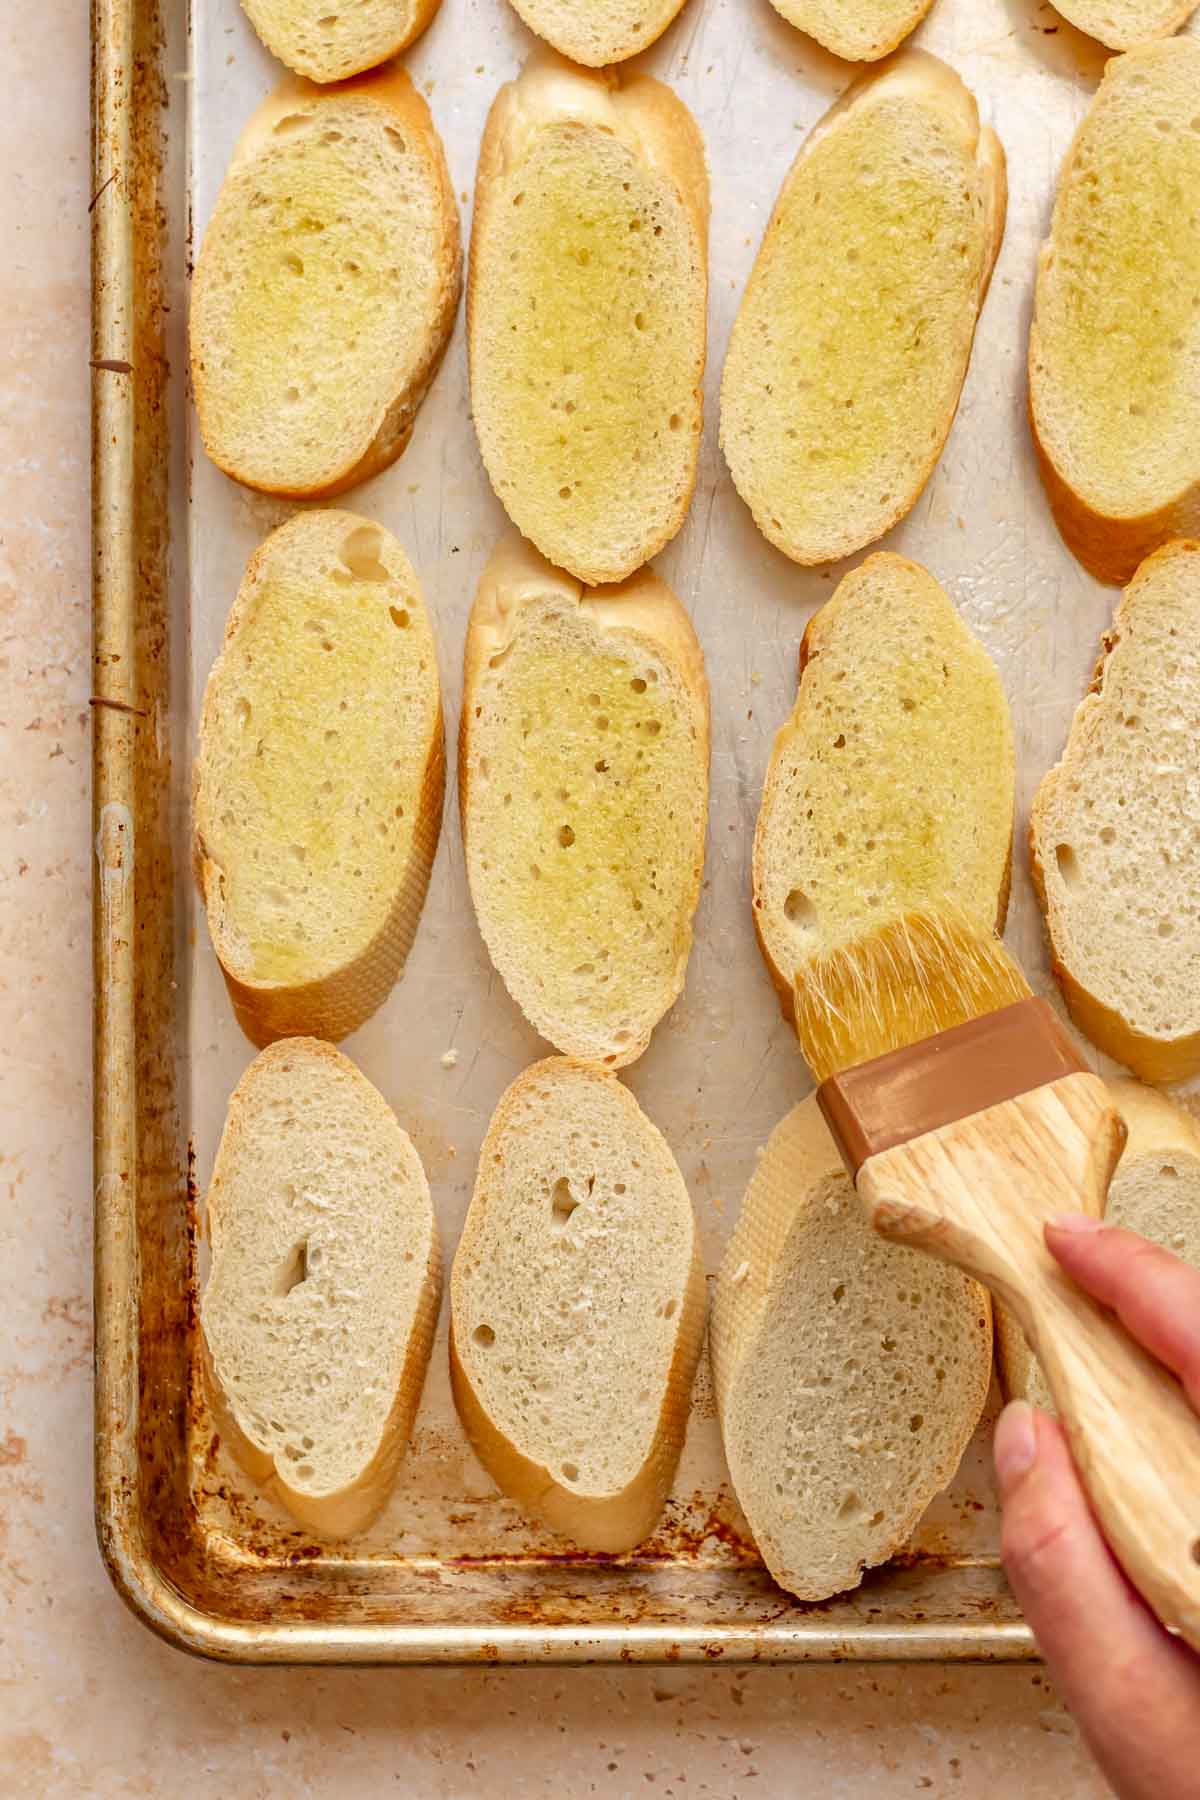 A brush adds olive oil onto bread slices.